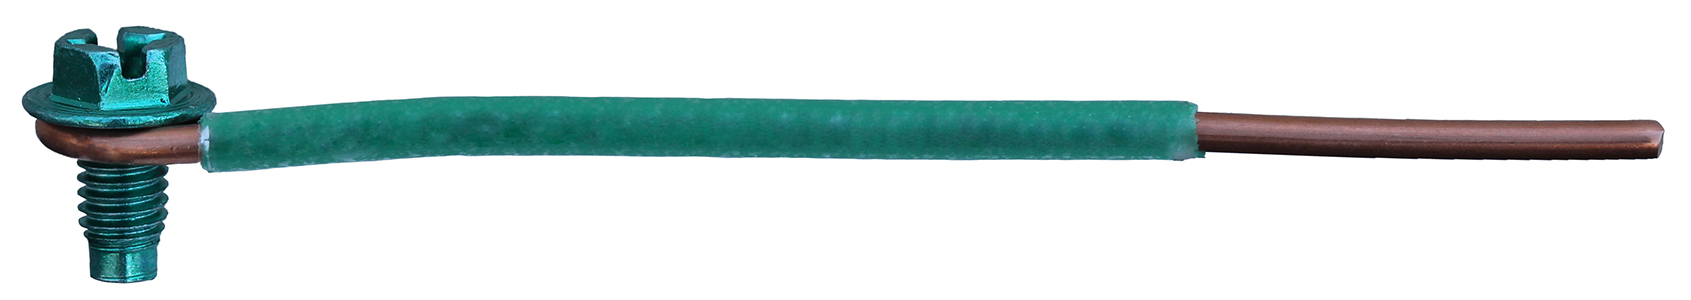 Ground Pigtail, 10-1/2 in. Size, 12 GA thickness